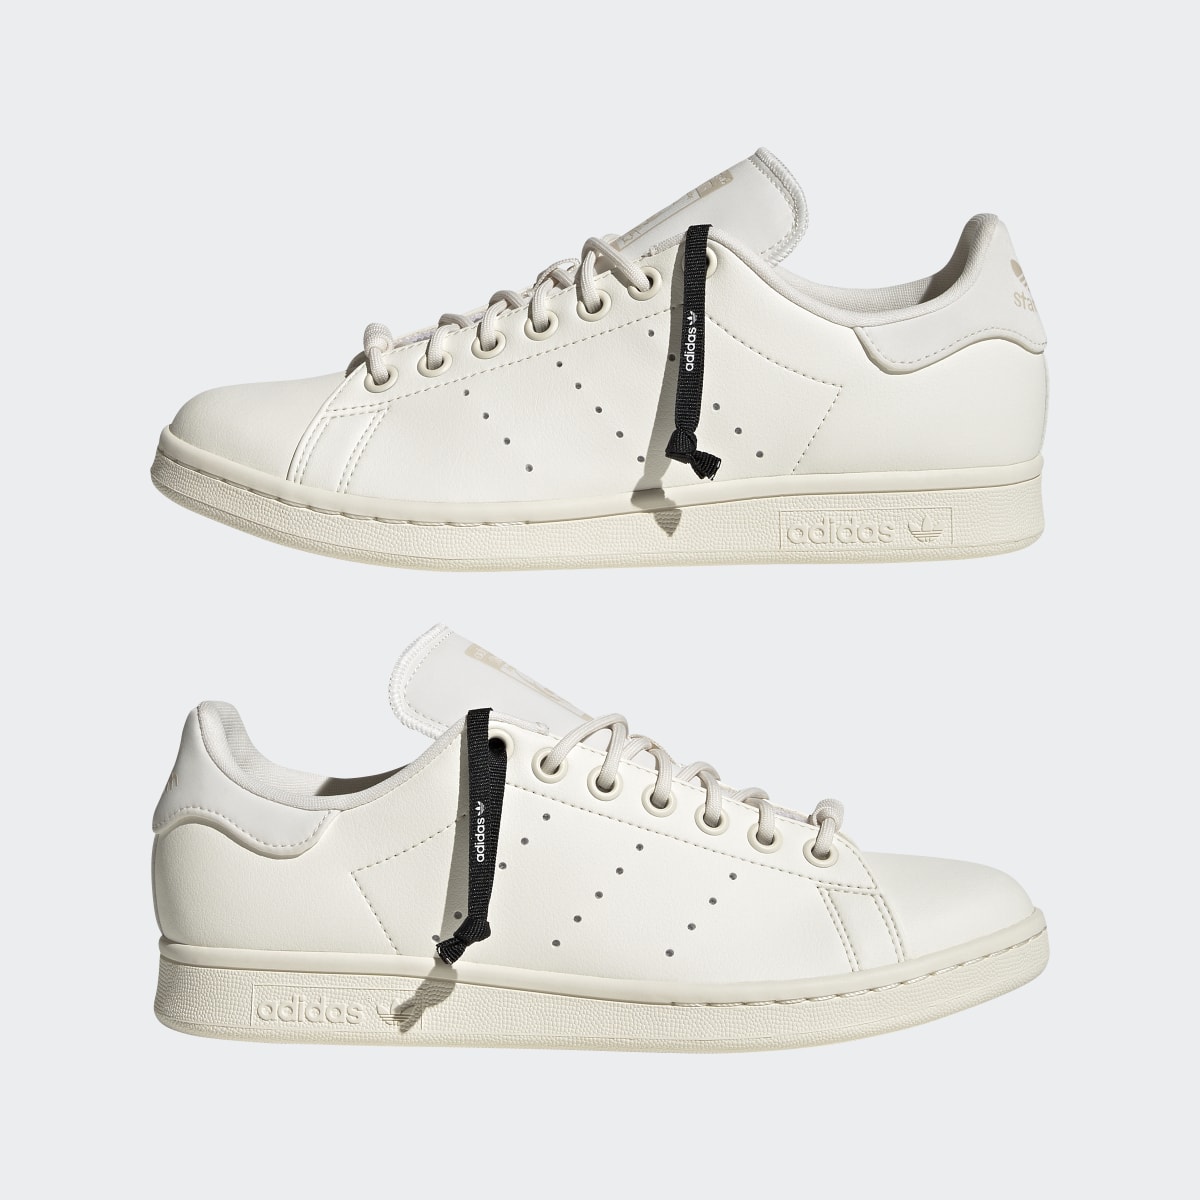 Adidas Stan Smith Shoes. 11